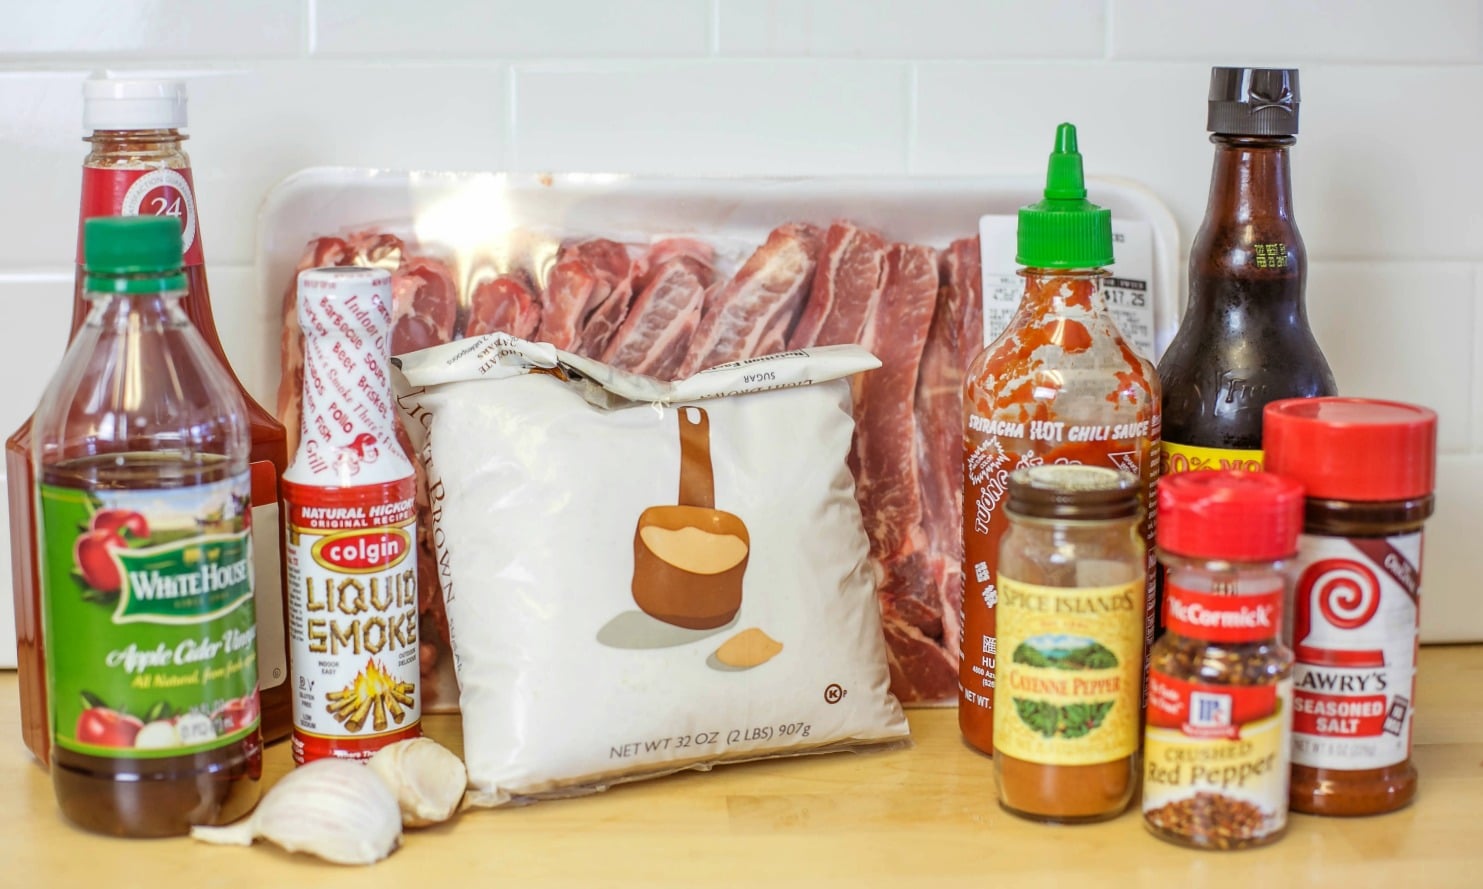 Ingredients you need for this sweet and spicy BBQ ribs recipe